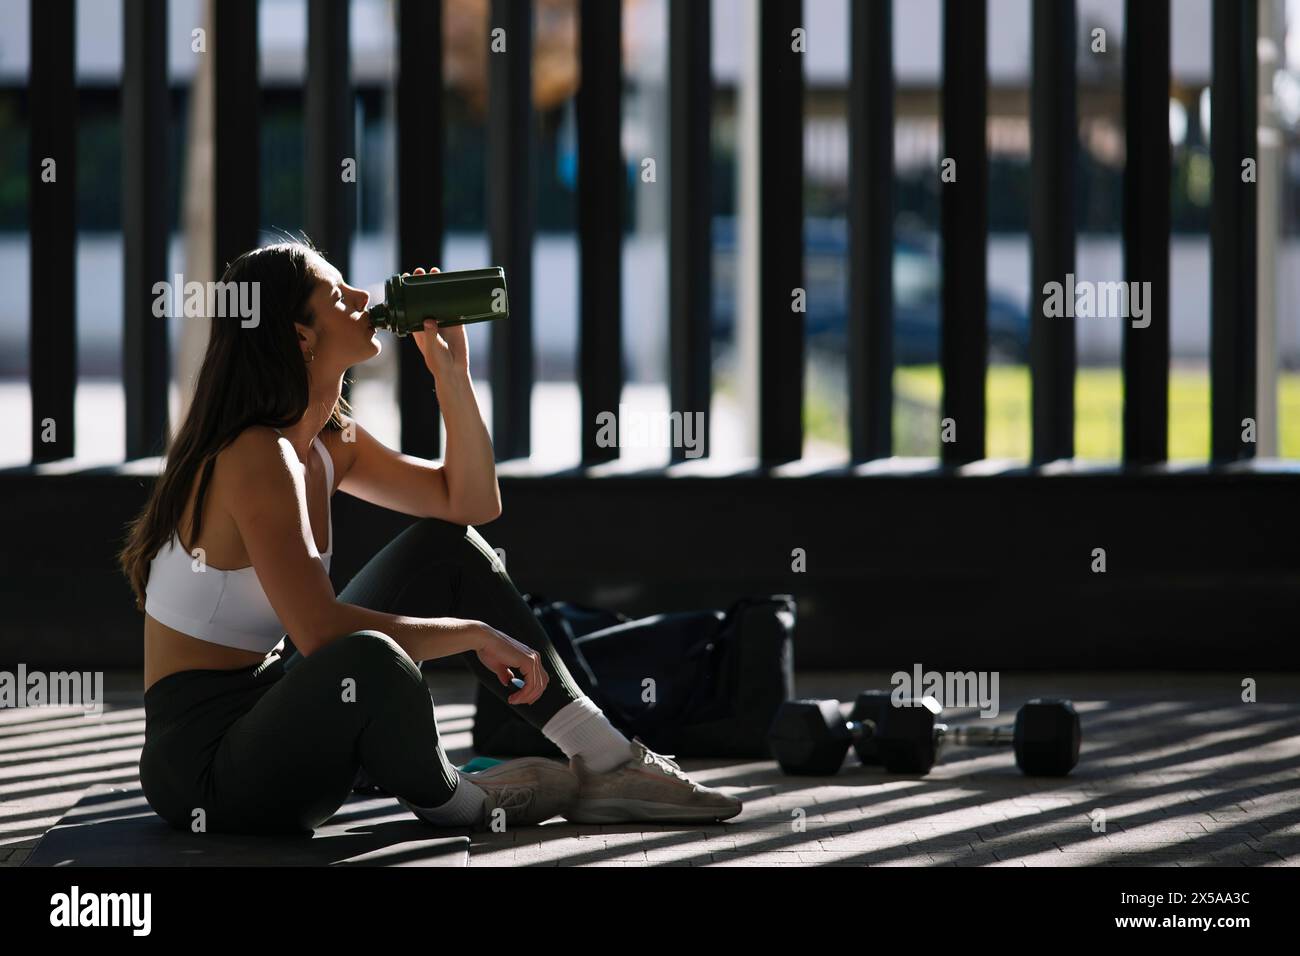 An athletic woman takes a break to drink water in a home gym setting, with sunlight streaming through windows and exercise equipment nearby Stock Photo